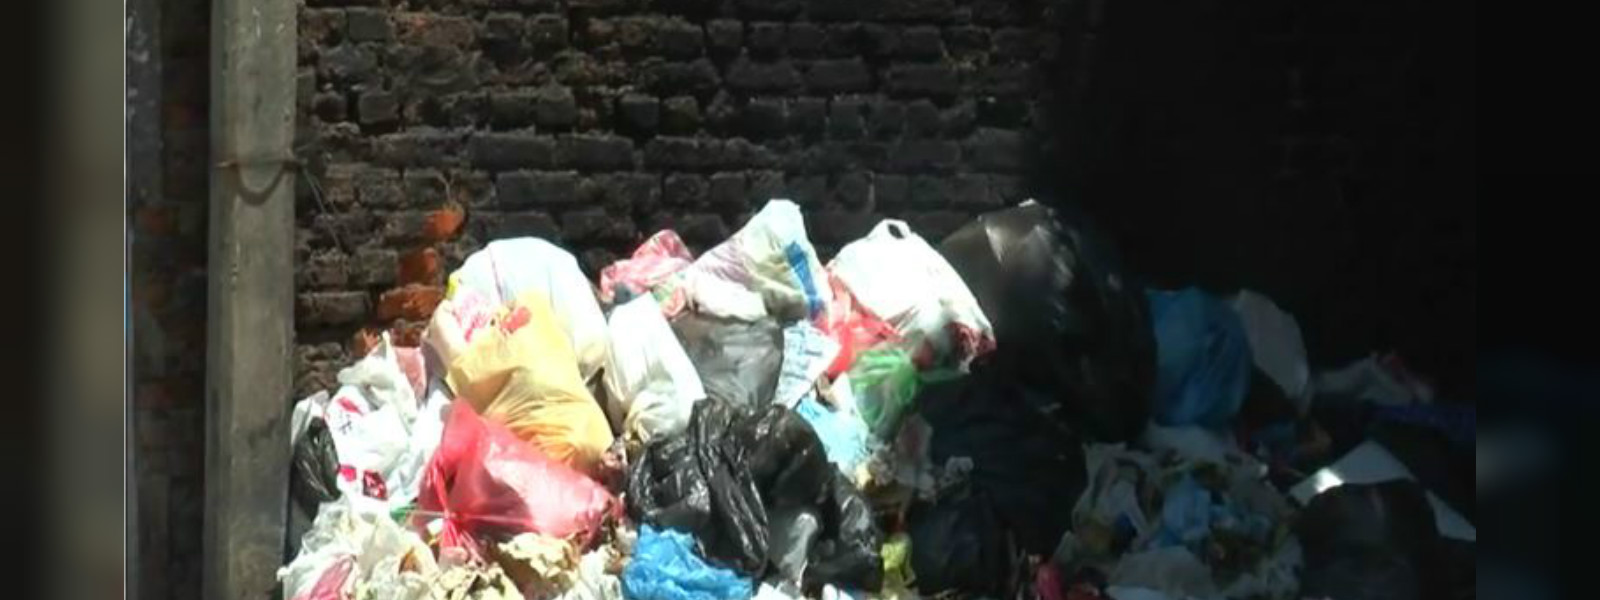 Garbage should be segregate before submission: CMC